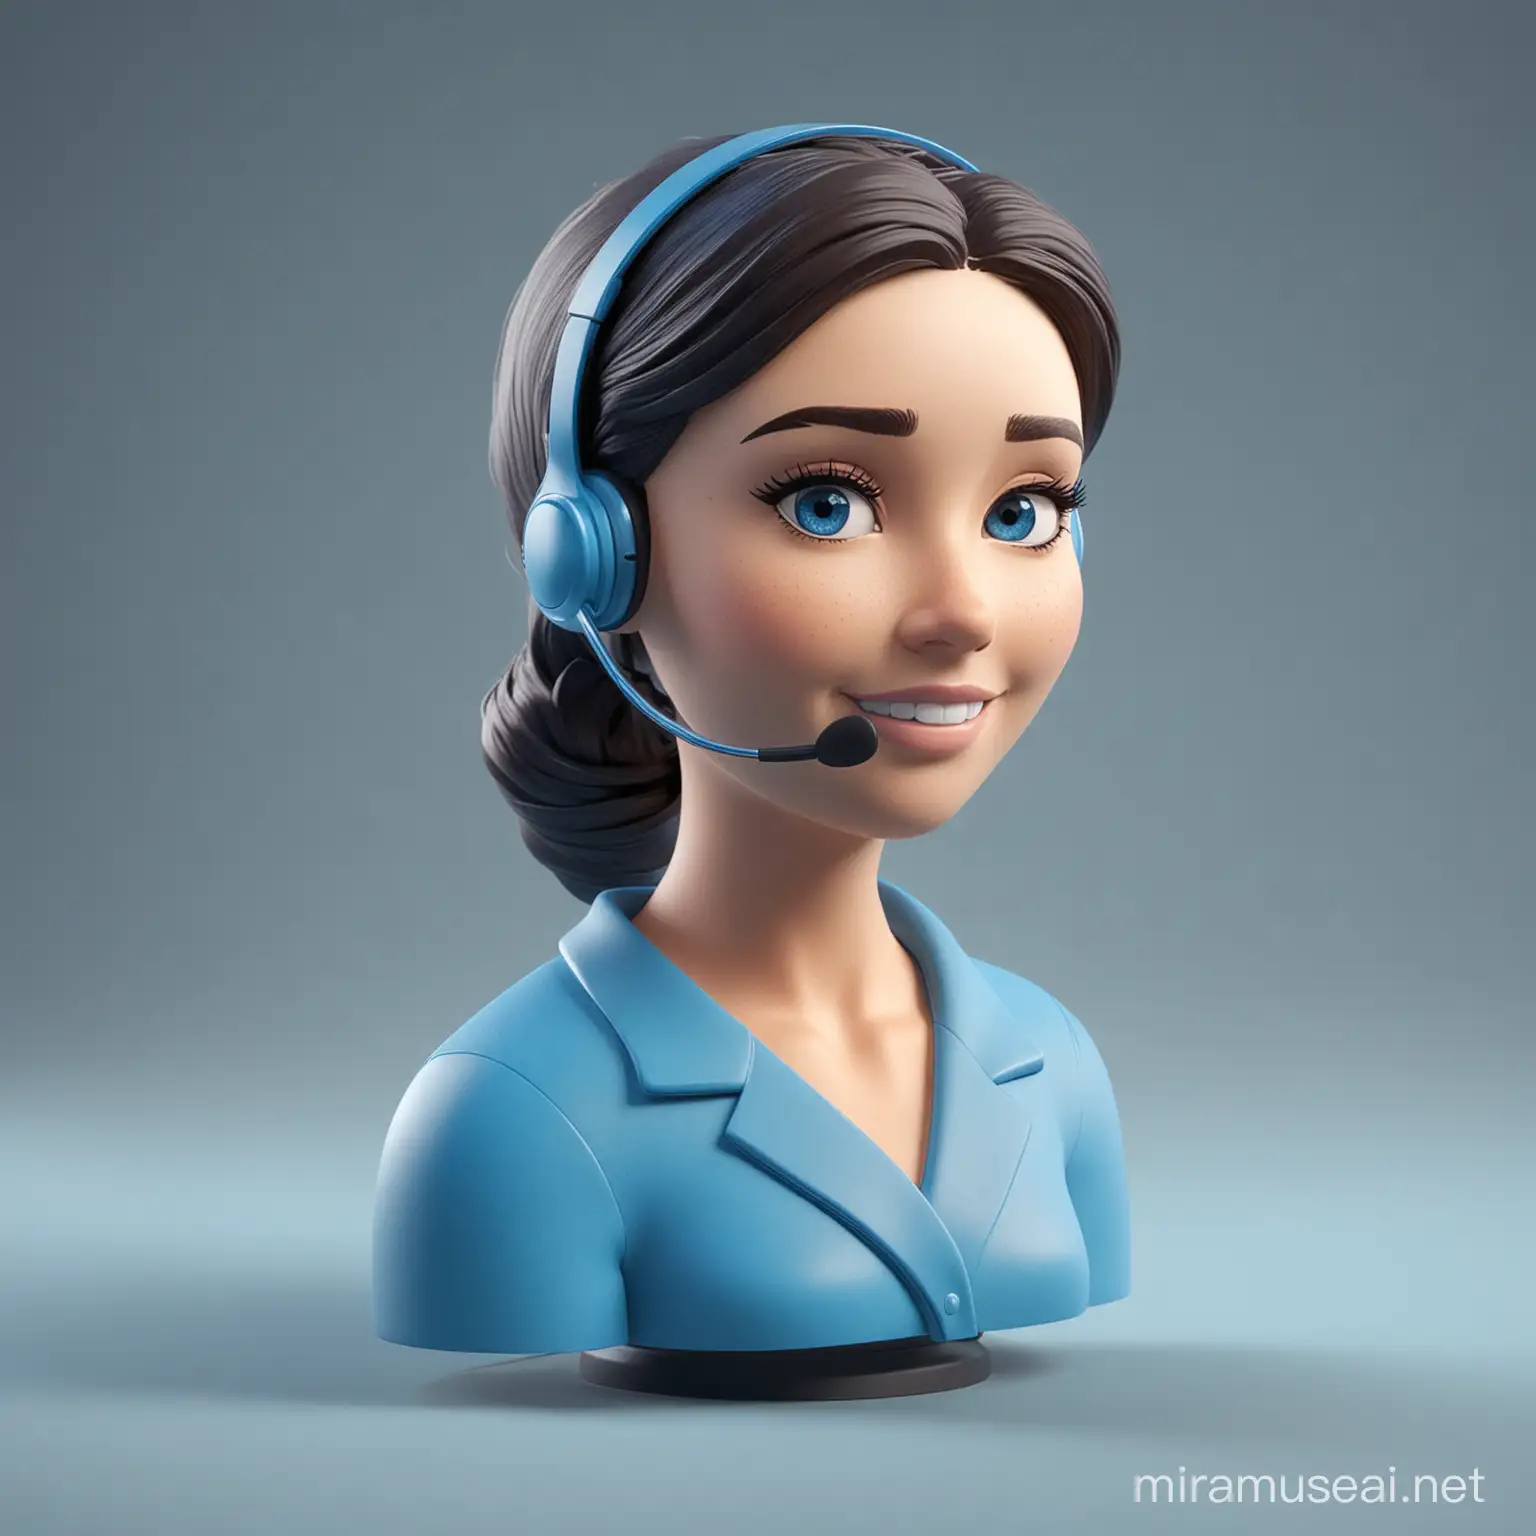 Blue 3D Virtual Receptionist Available 247